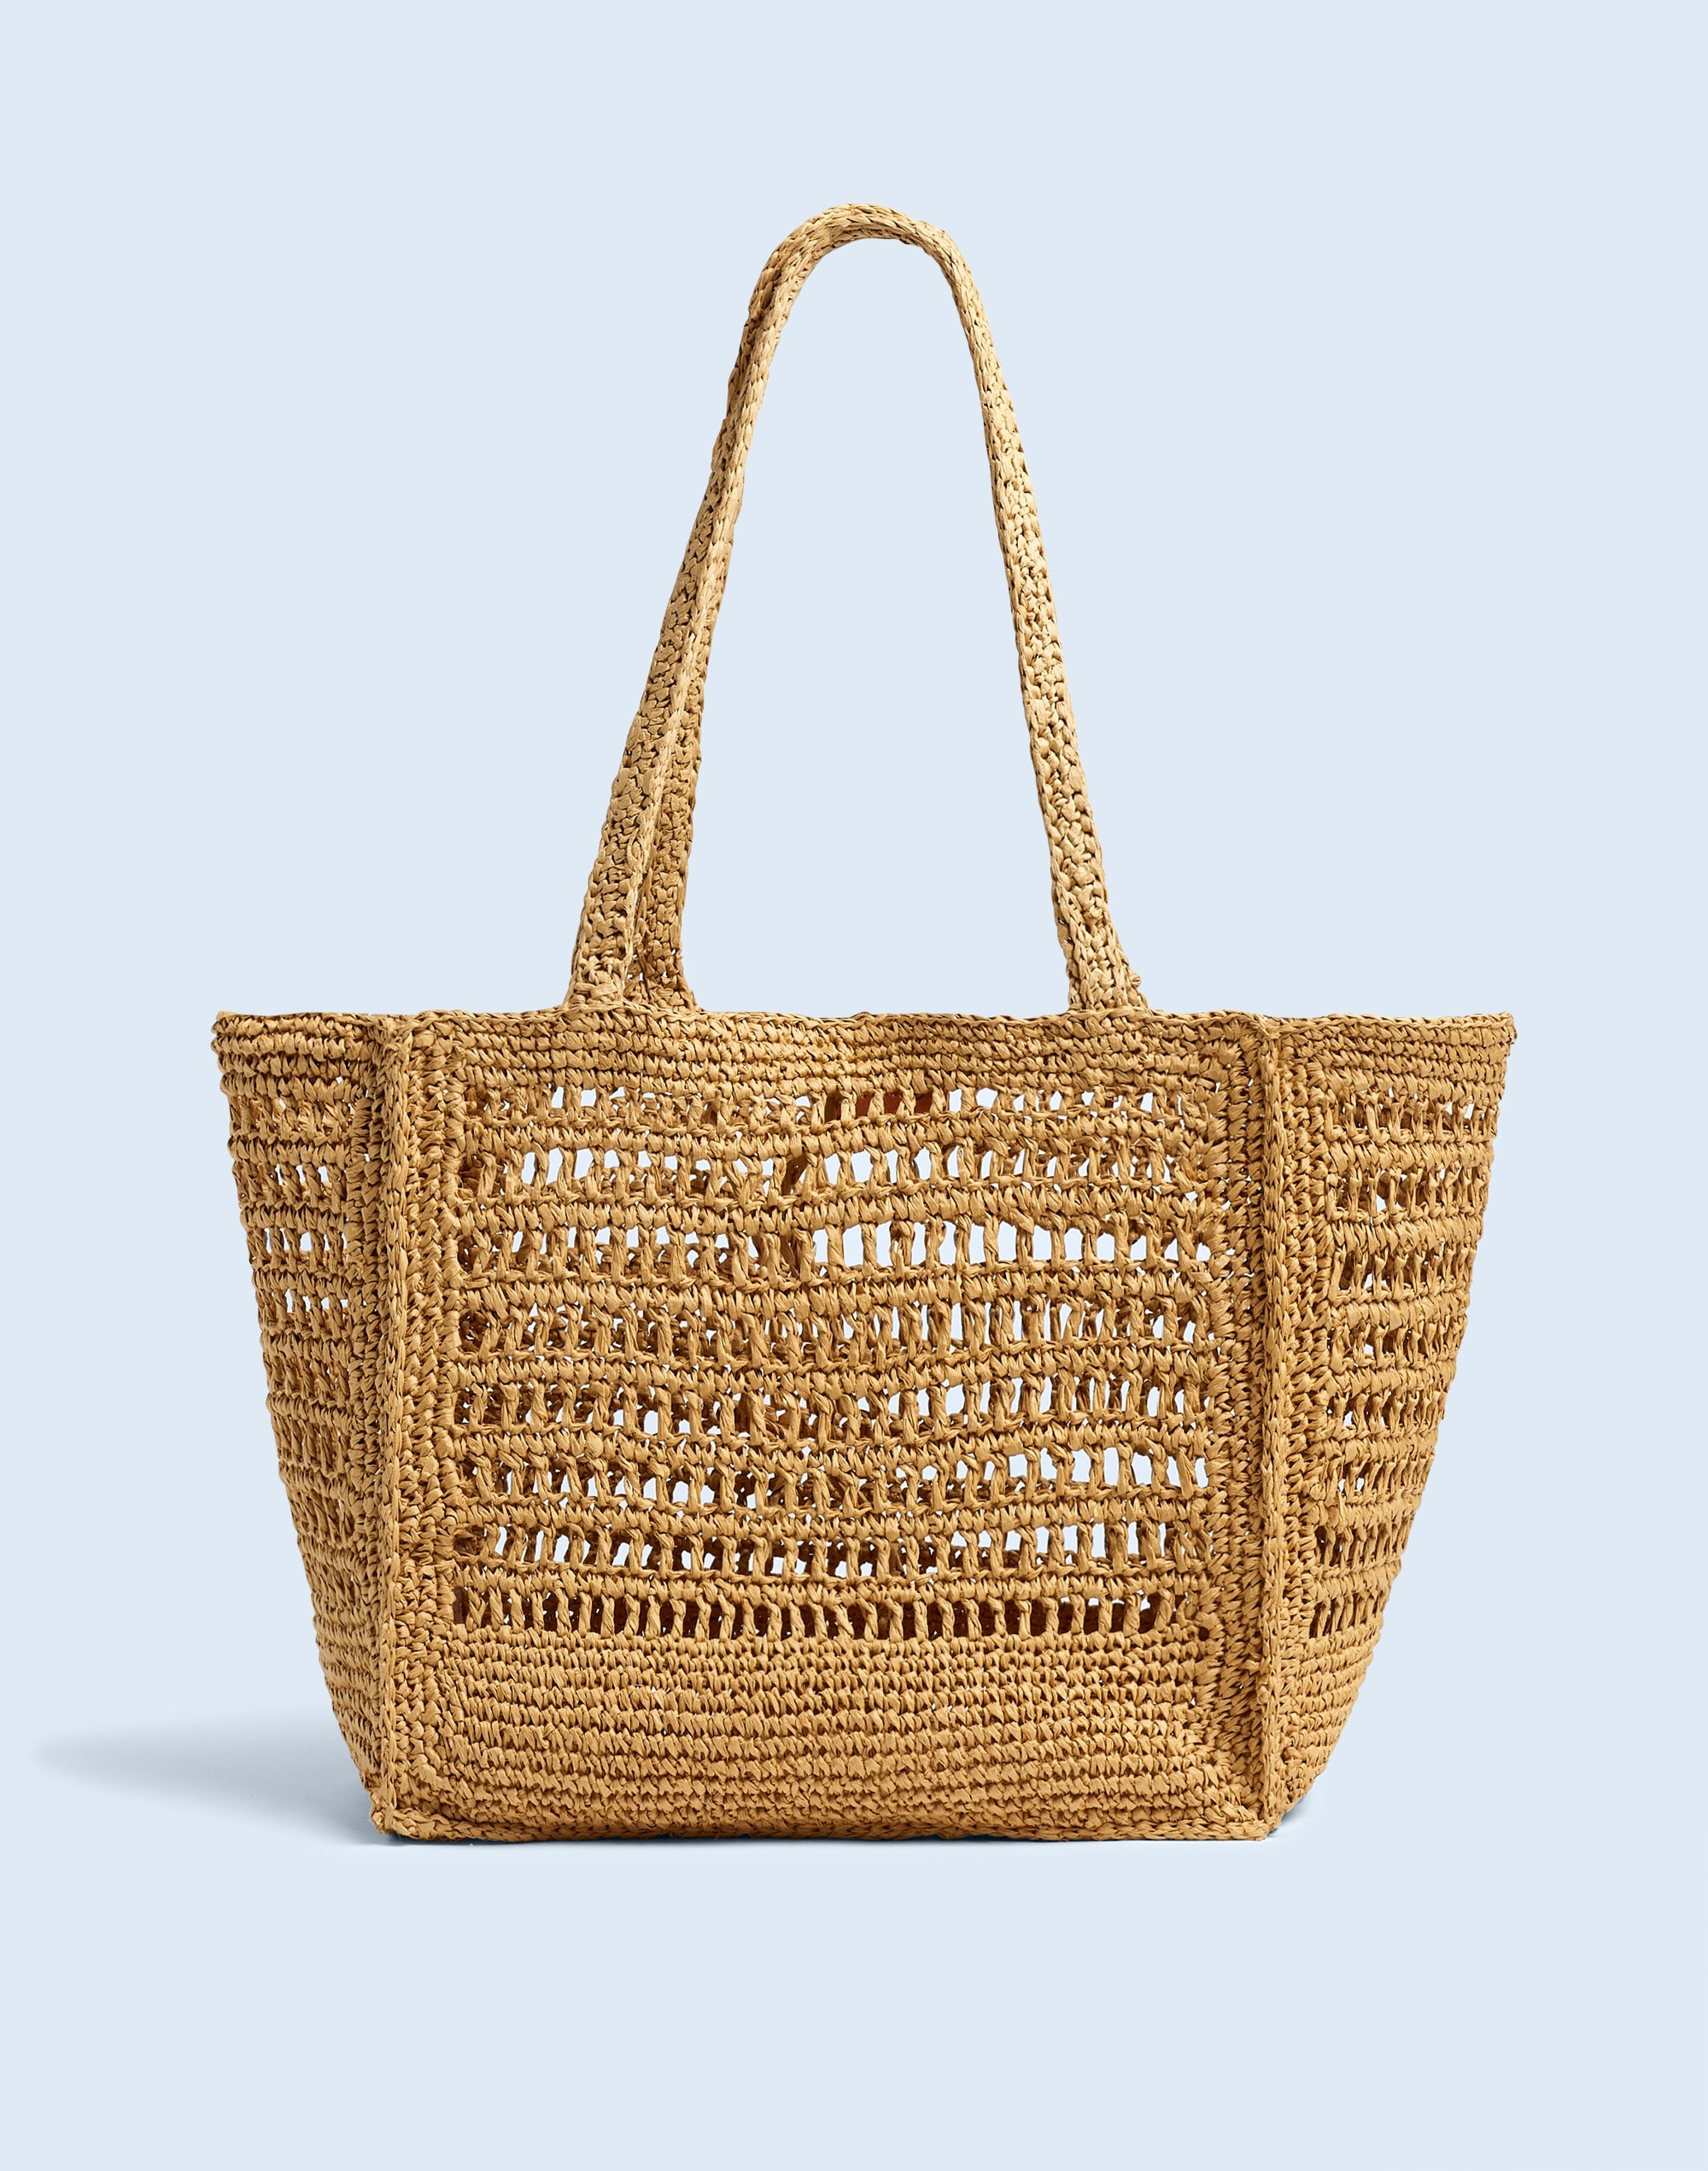 The Open-Crochet Straw Packable Tote | Madewell